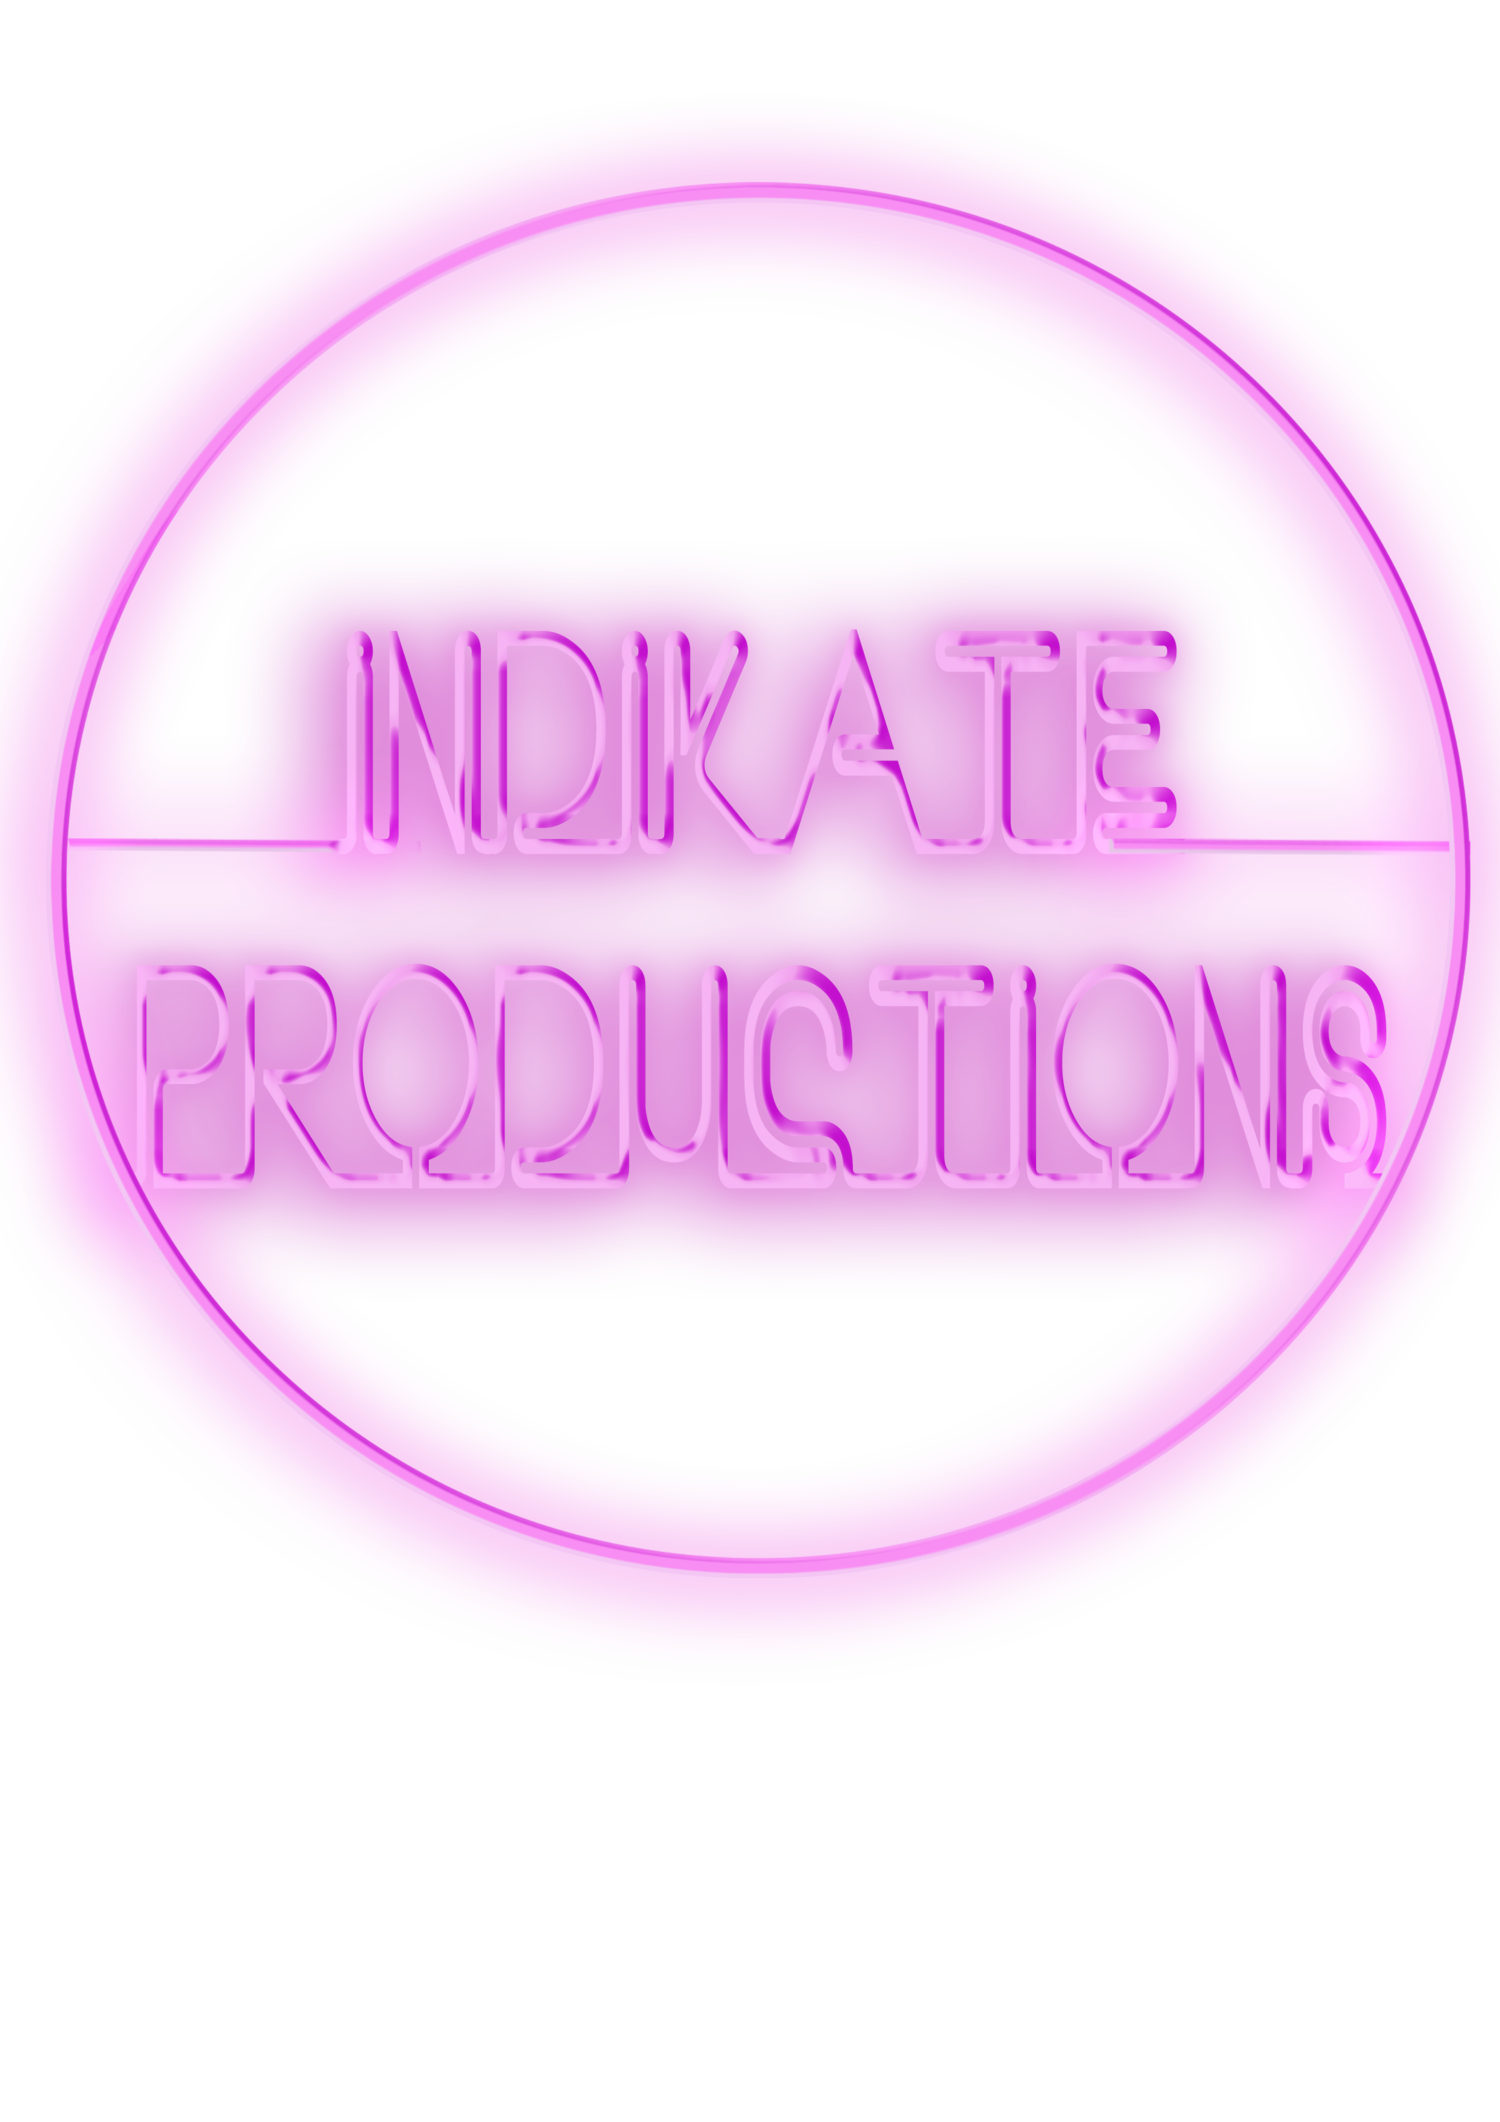 INDIKATE PRODUCTIONS